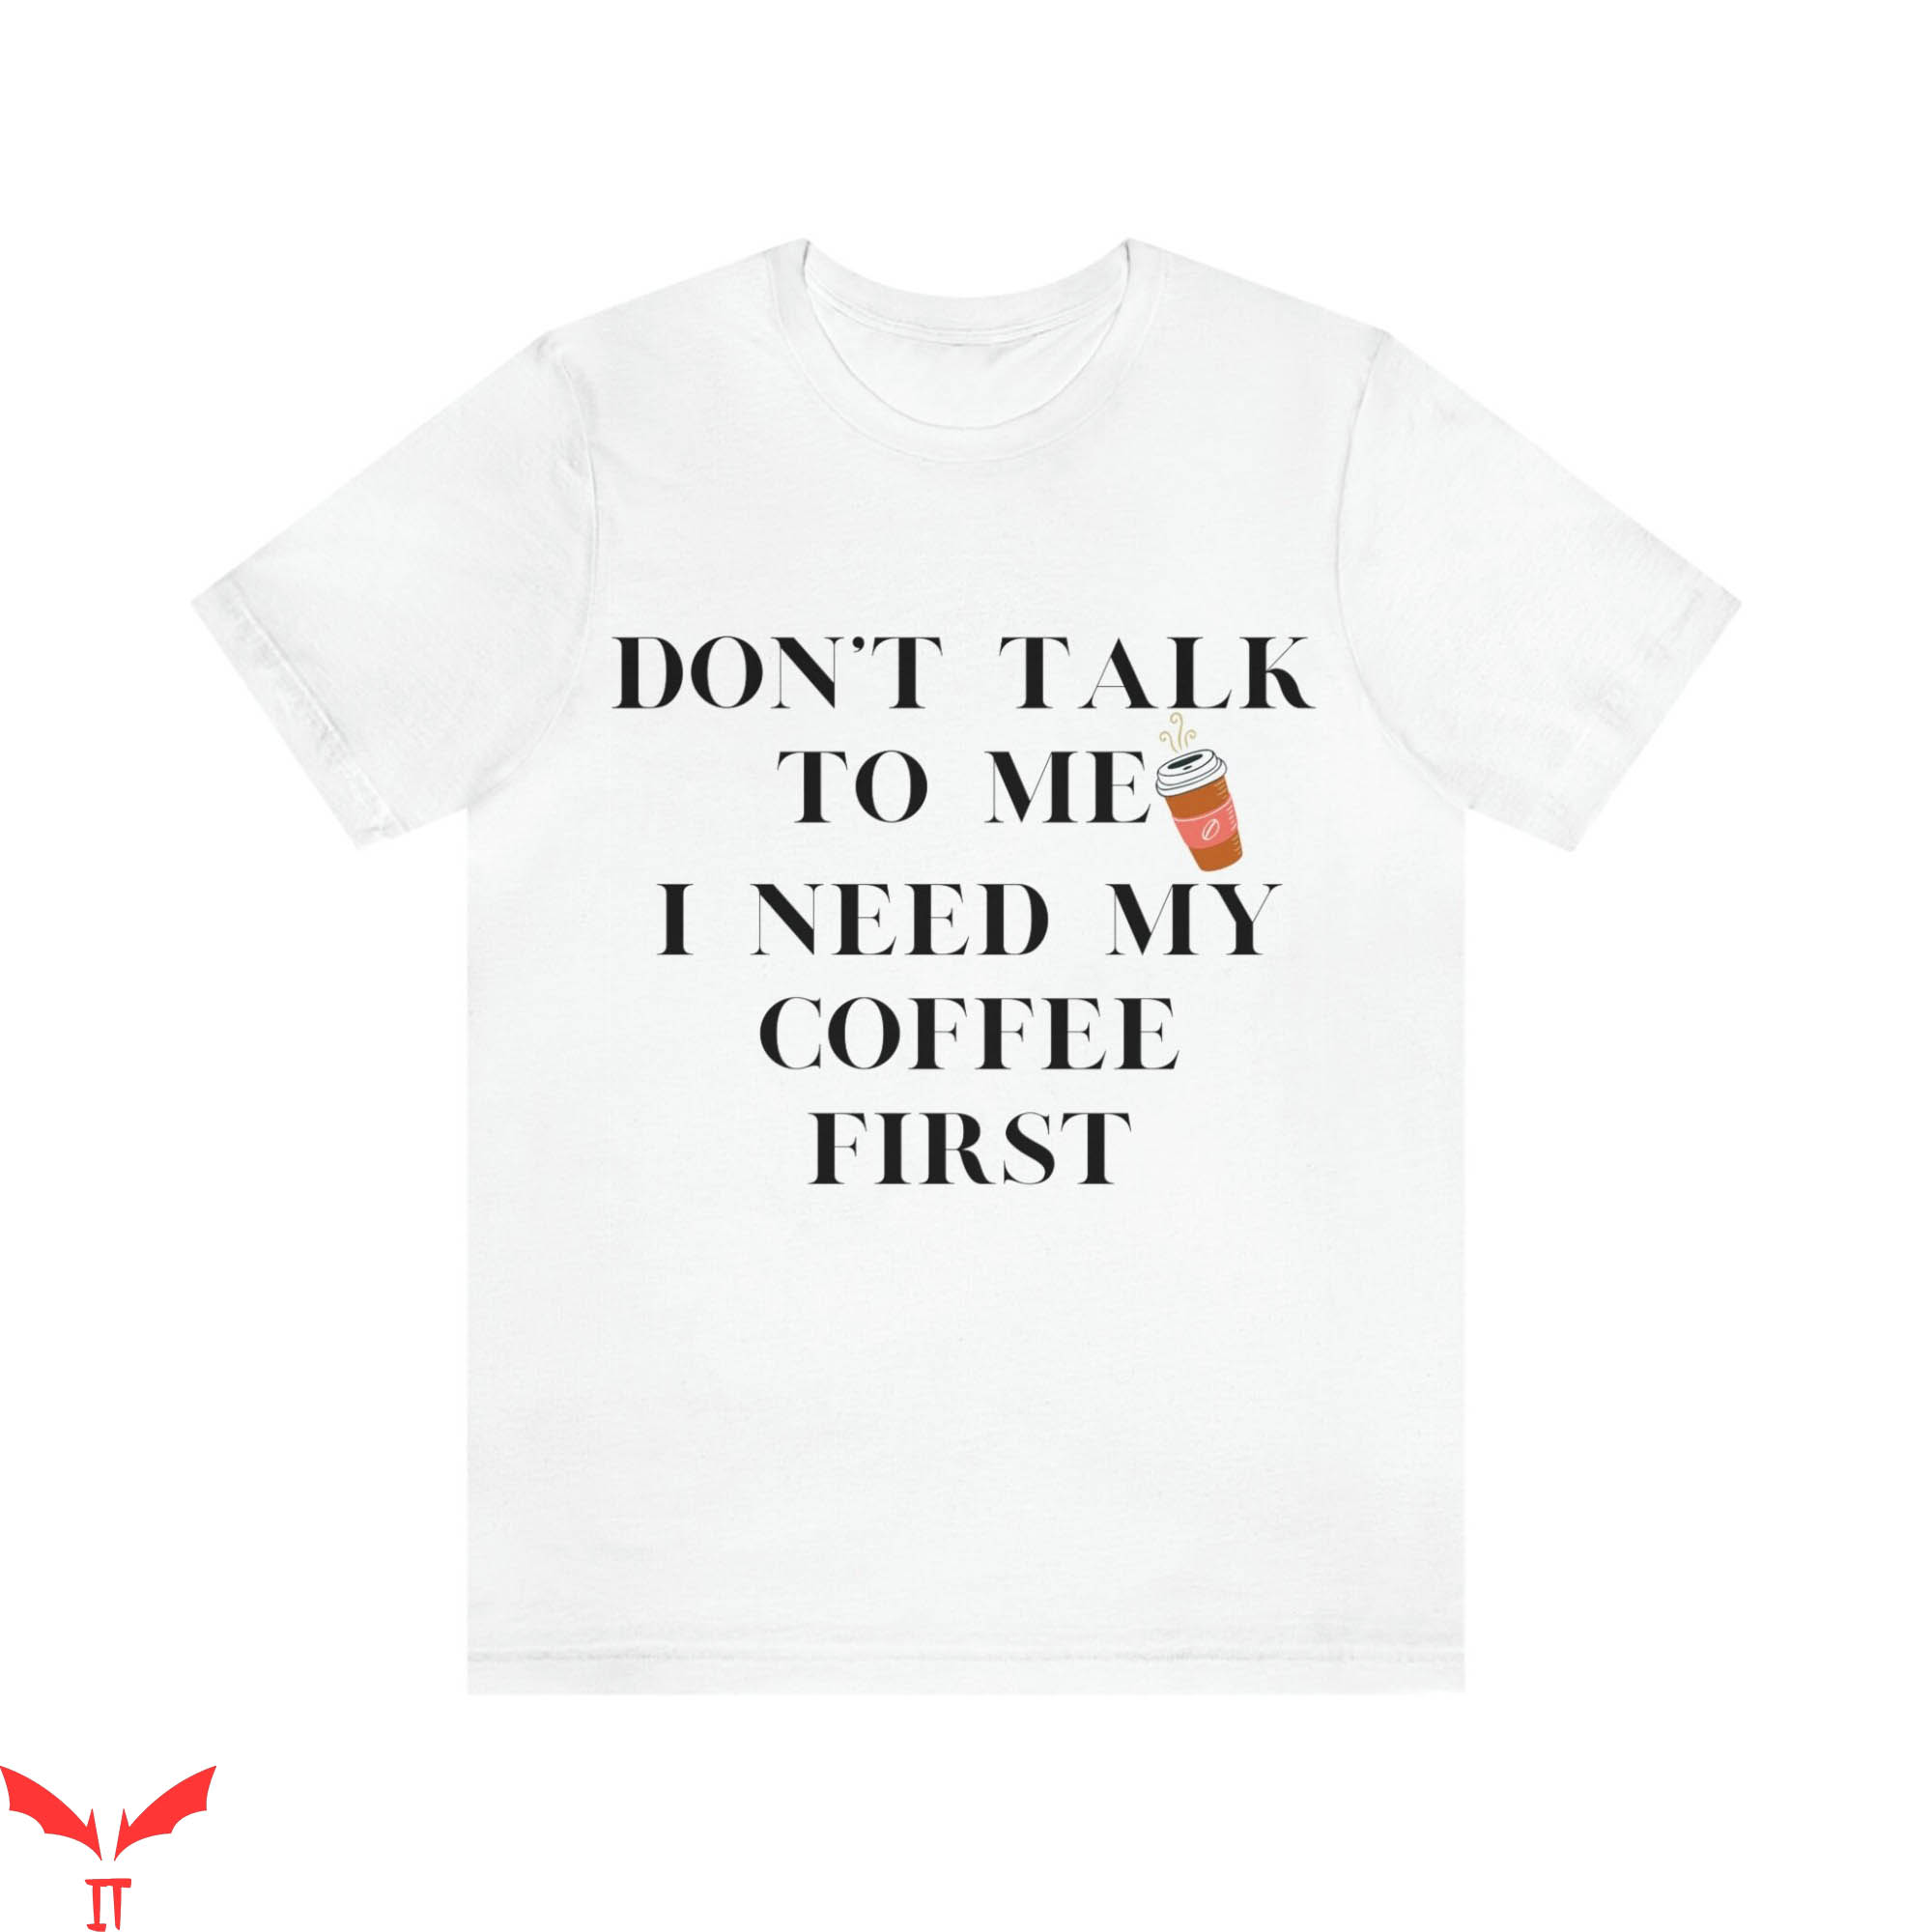 Don't Talk To Me T-Shirt I Need My Coffee First Tee Shirt